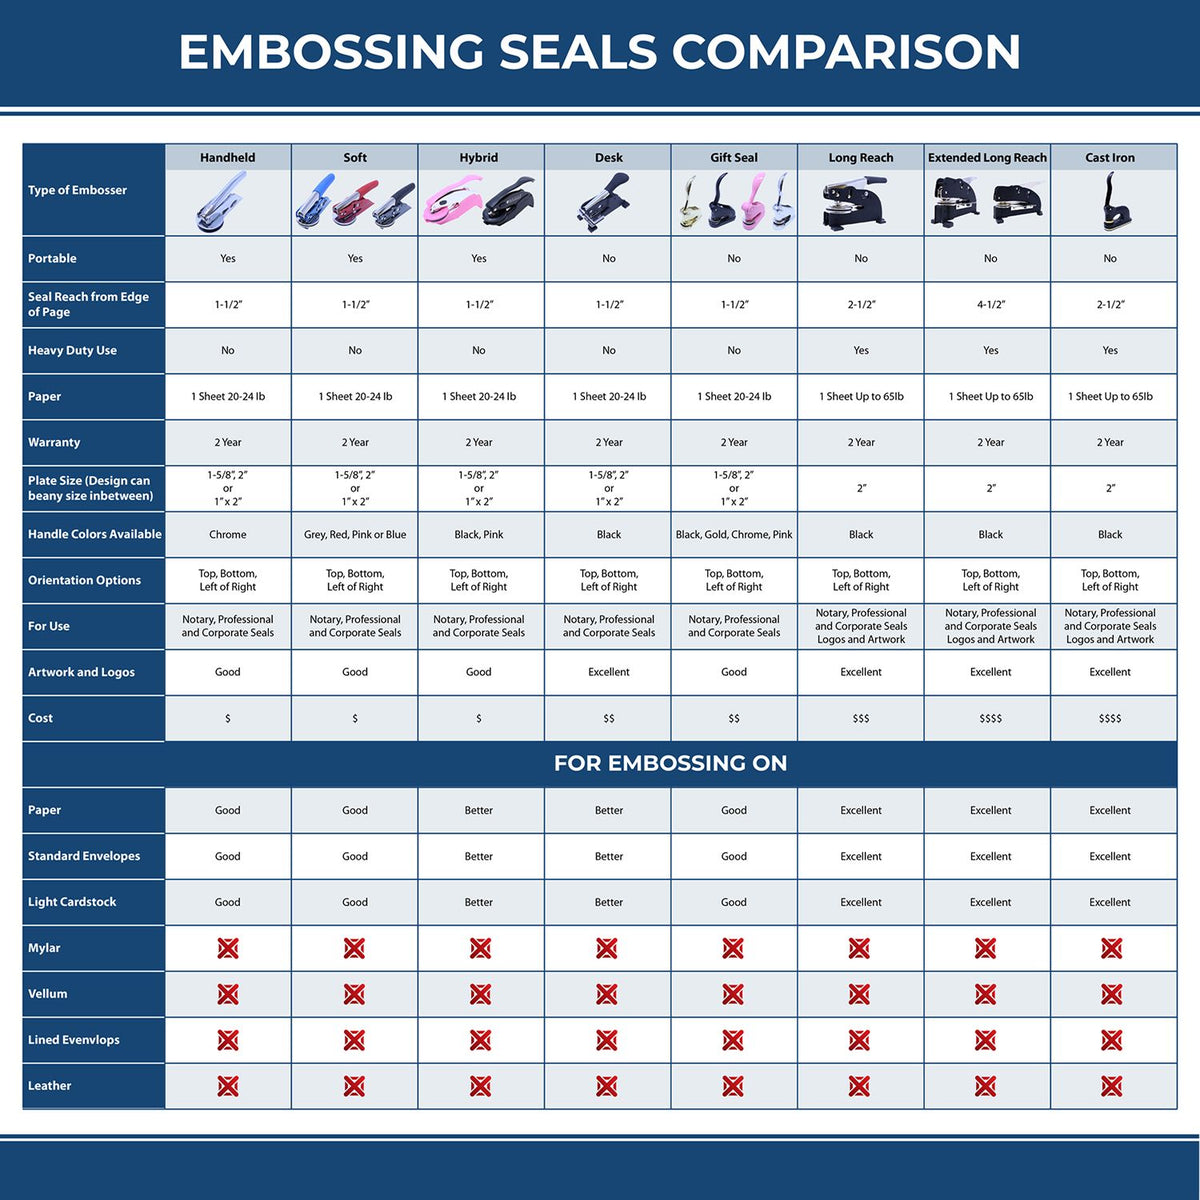 A comparison chart for the different types of mount models available for the Handheld Maryland Land Surveyor Seal.